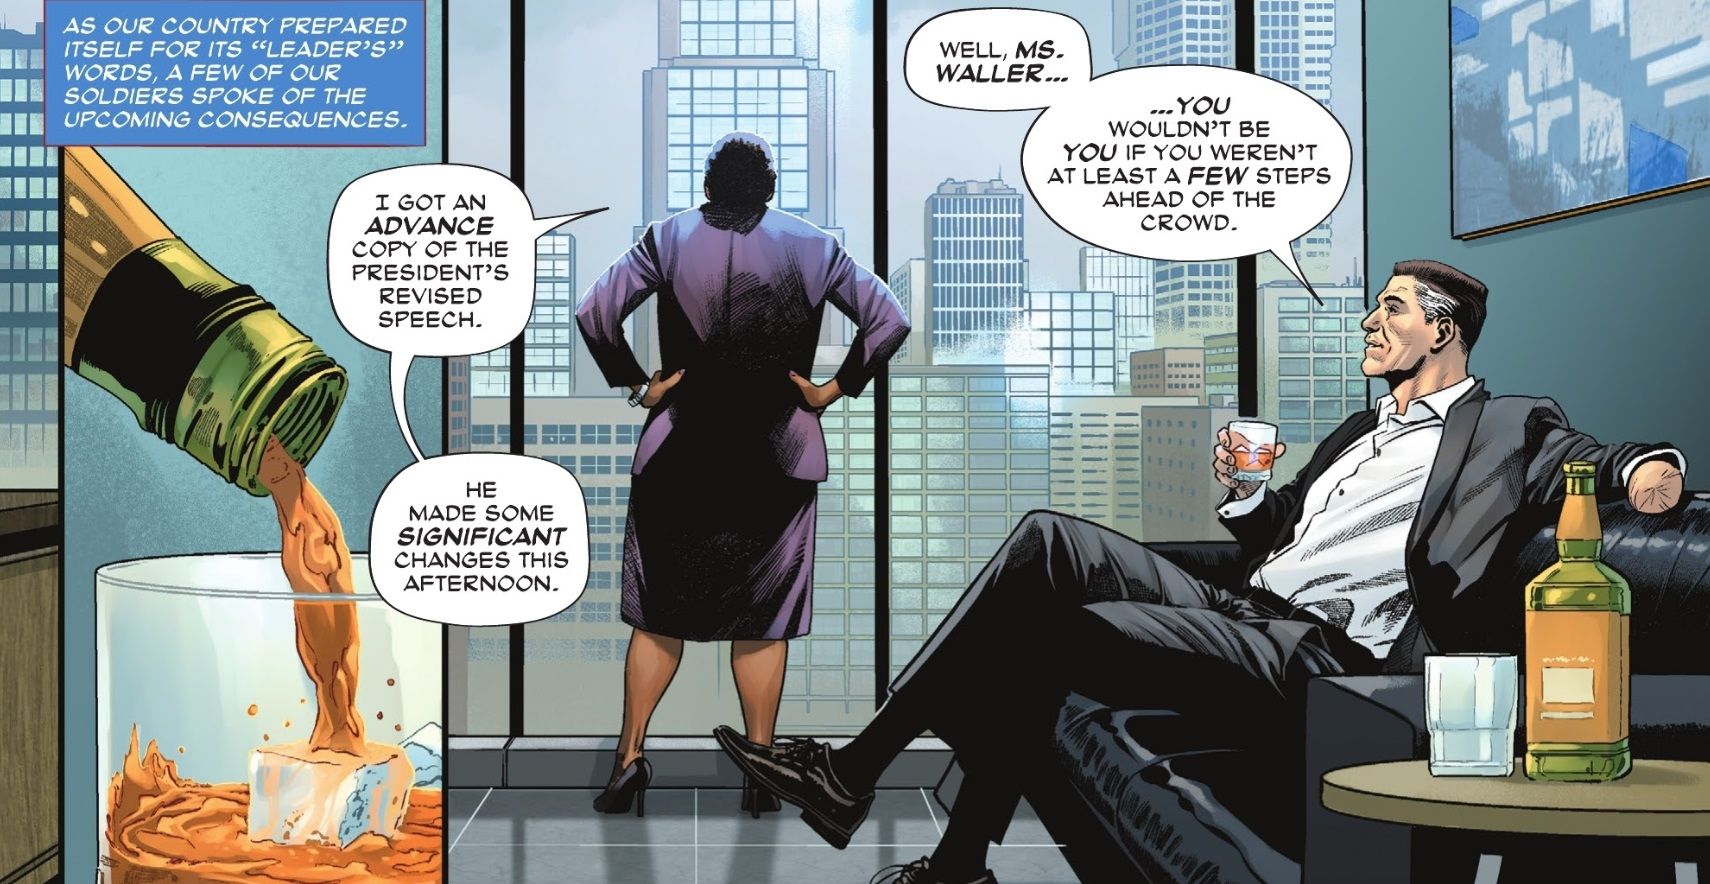 Waller and Steel sit in a high-rise lounge, discussing their anti- Wonder Woman policy over drinks.